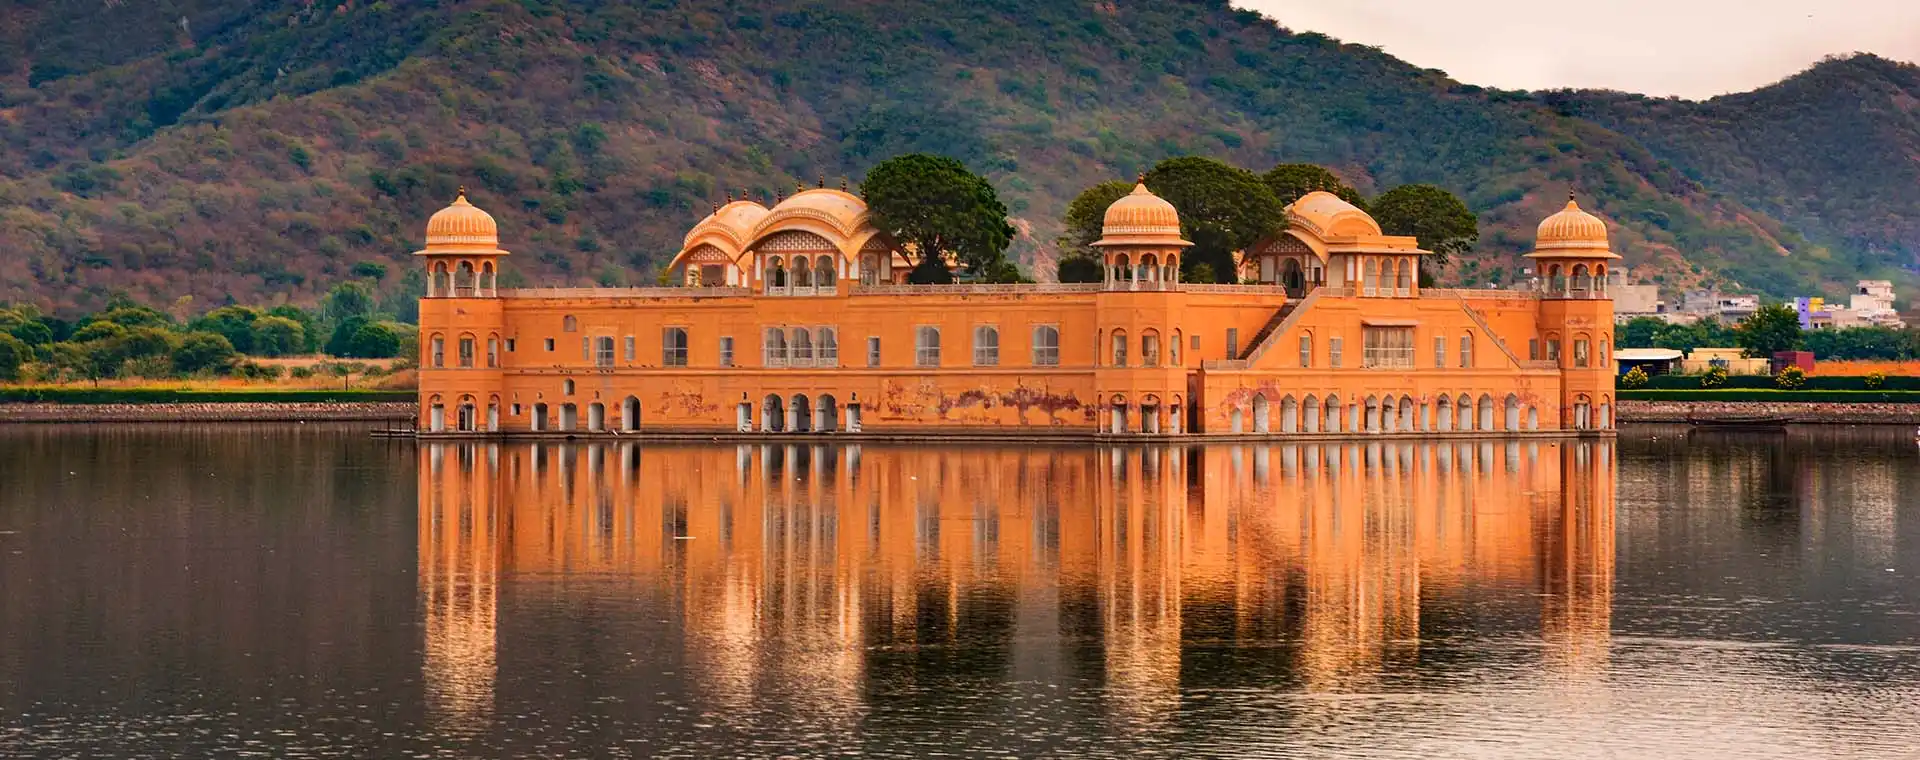 Forts in Udaipur